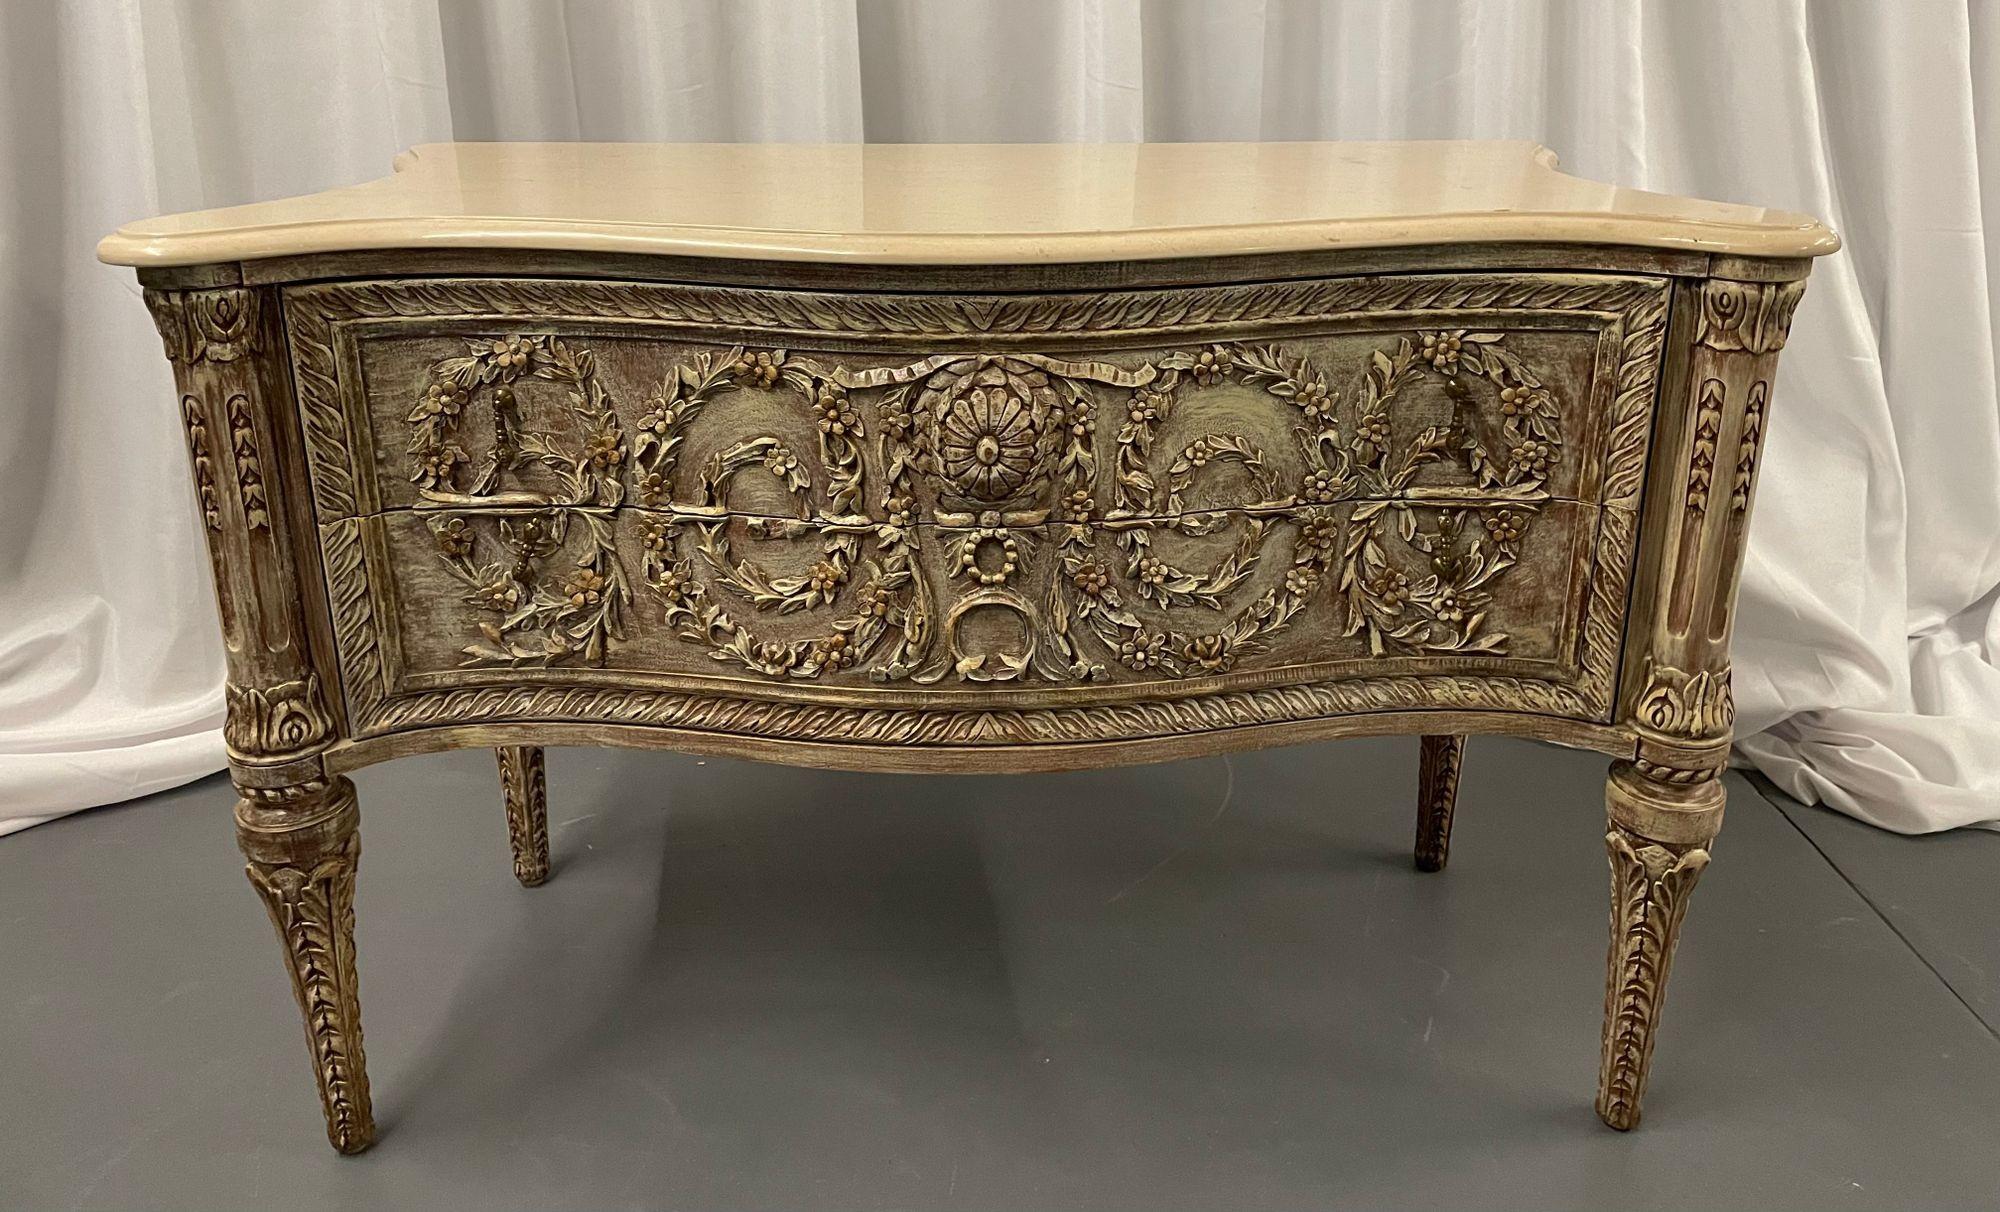 A Rococo Style Commode, Chest or Bedside Stand having a Marble Top, Carved
 
A finely carved two drawer commode or chest.  The drawers themselves are equipped with sliders for easy access and have interiors that are neatly fitted with soft velour.  